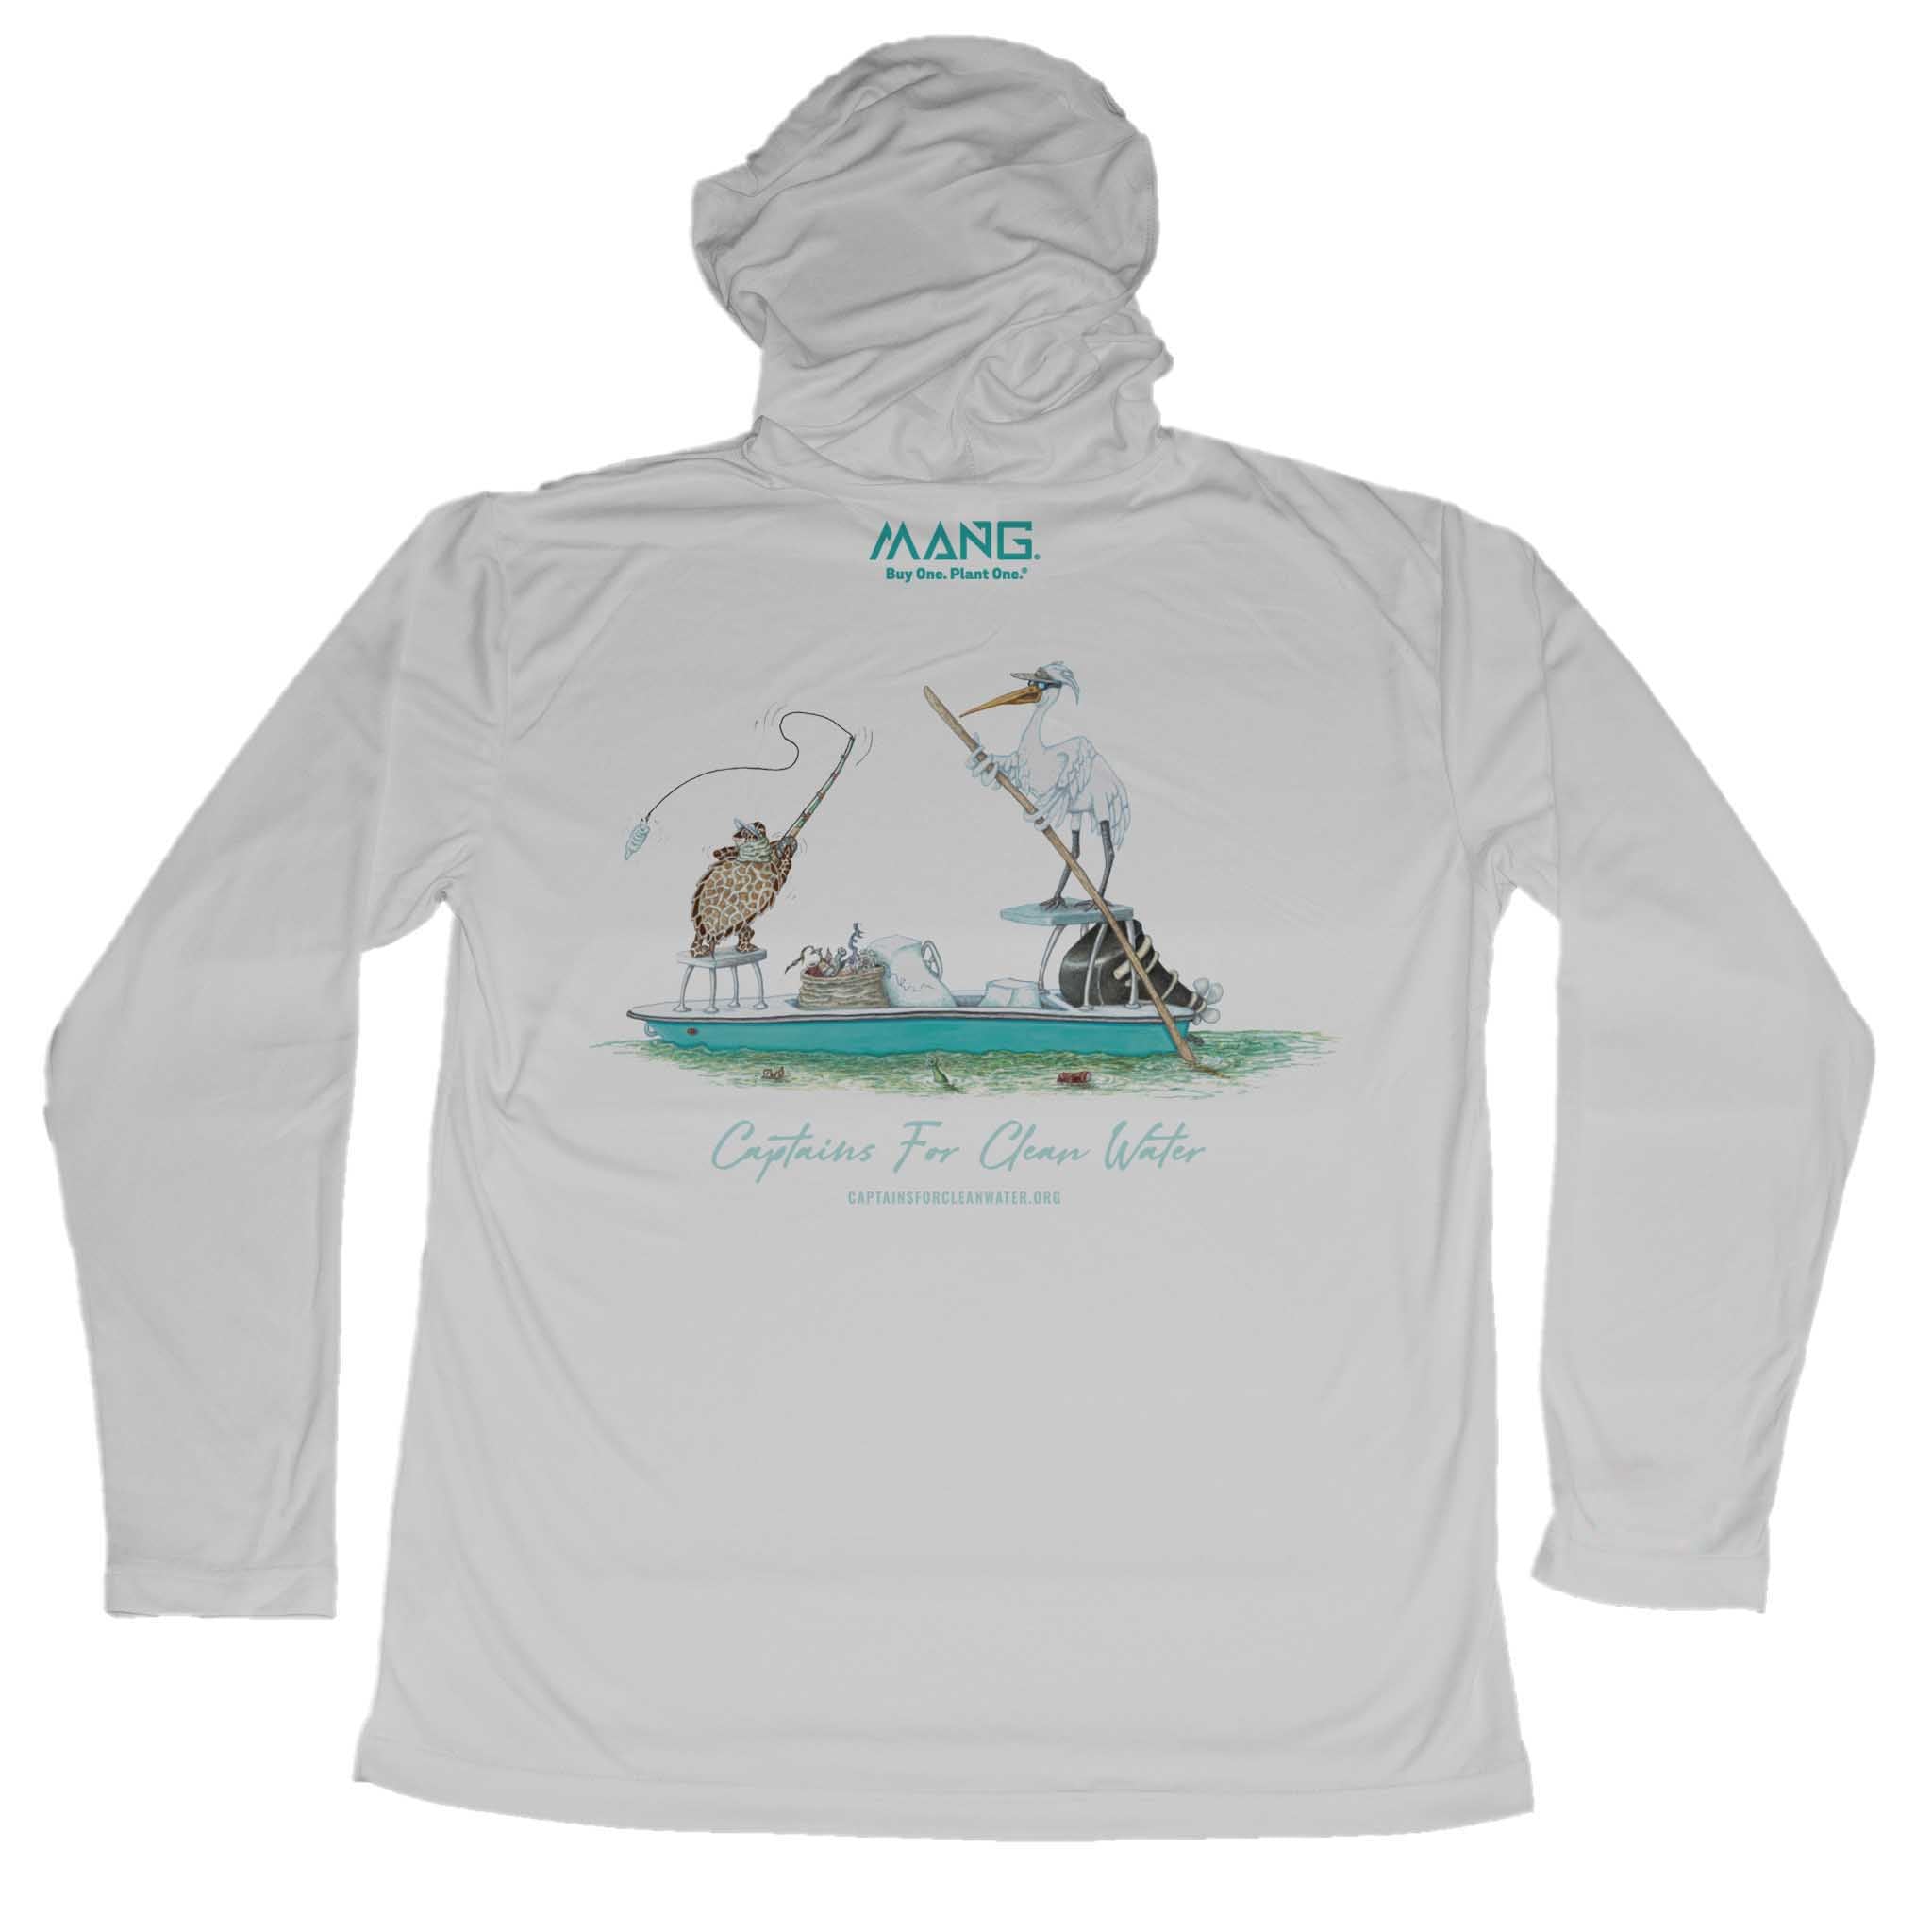 MANG Captain Cleanwater - Youth - Hoodie - YXS-Pearl Gray